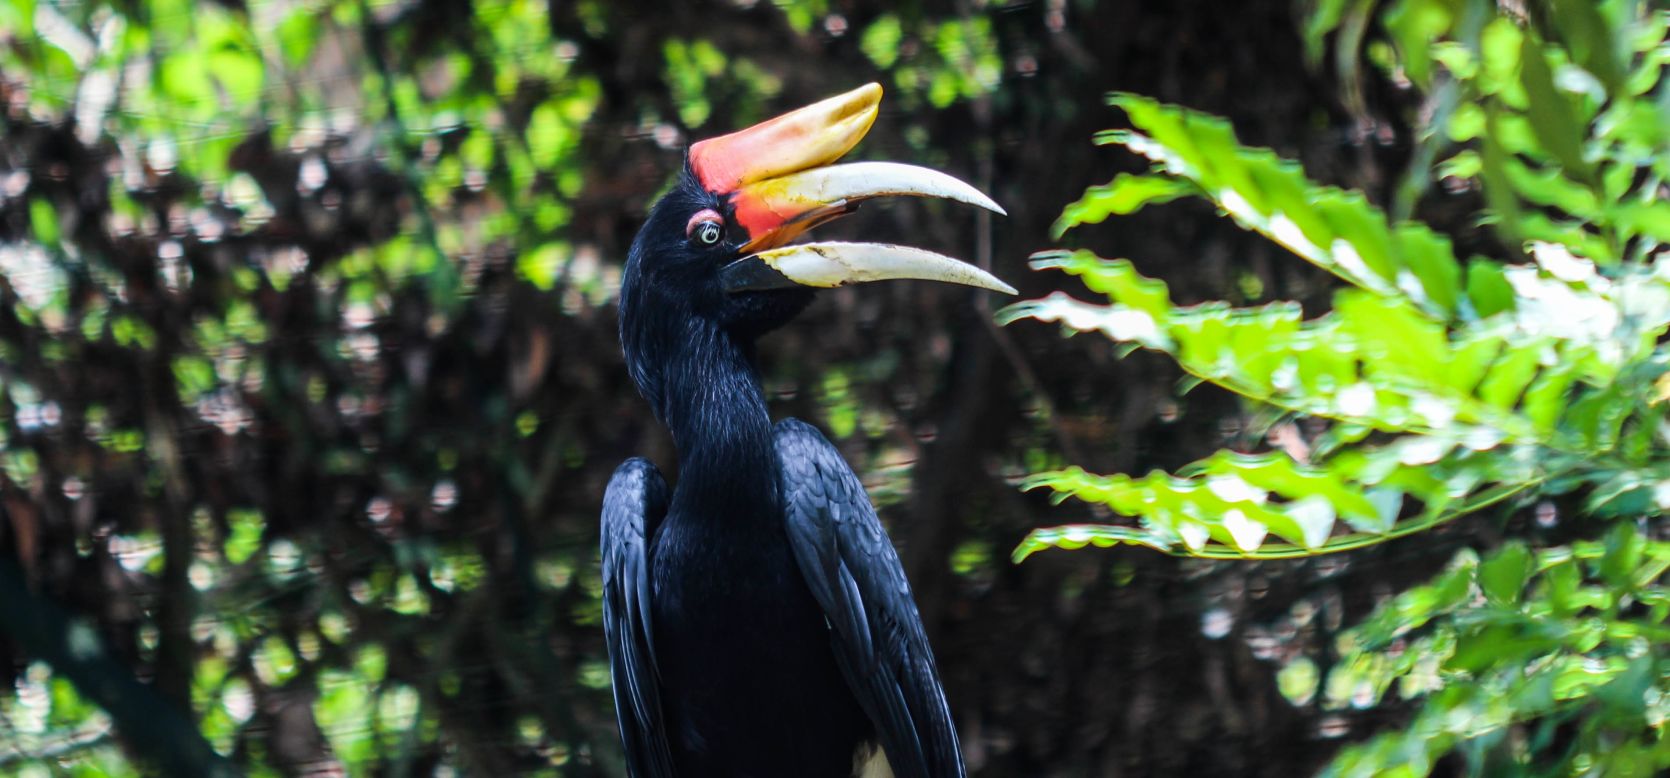 A stopover for many long-distance migratory birds and seasonal visitors from northern Asia, the forests are home to some spectacular bird species. The rhinoceros hornbill, pictured, is one of eight hornbill species found on the island. Populations are <a href="http://wwf.panda.org/what_we_do/where_we_work/borneo_forests/about_borneo_forests/borneo_animals/borneo_birds/" target="_blank" target="_blank">in decline</a> due to habitat loss and poaching leading to local extinction in some areas. <br />